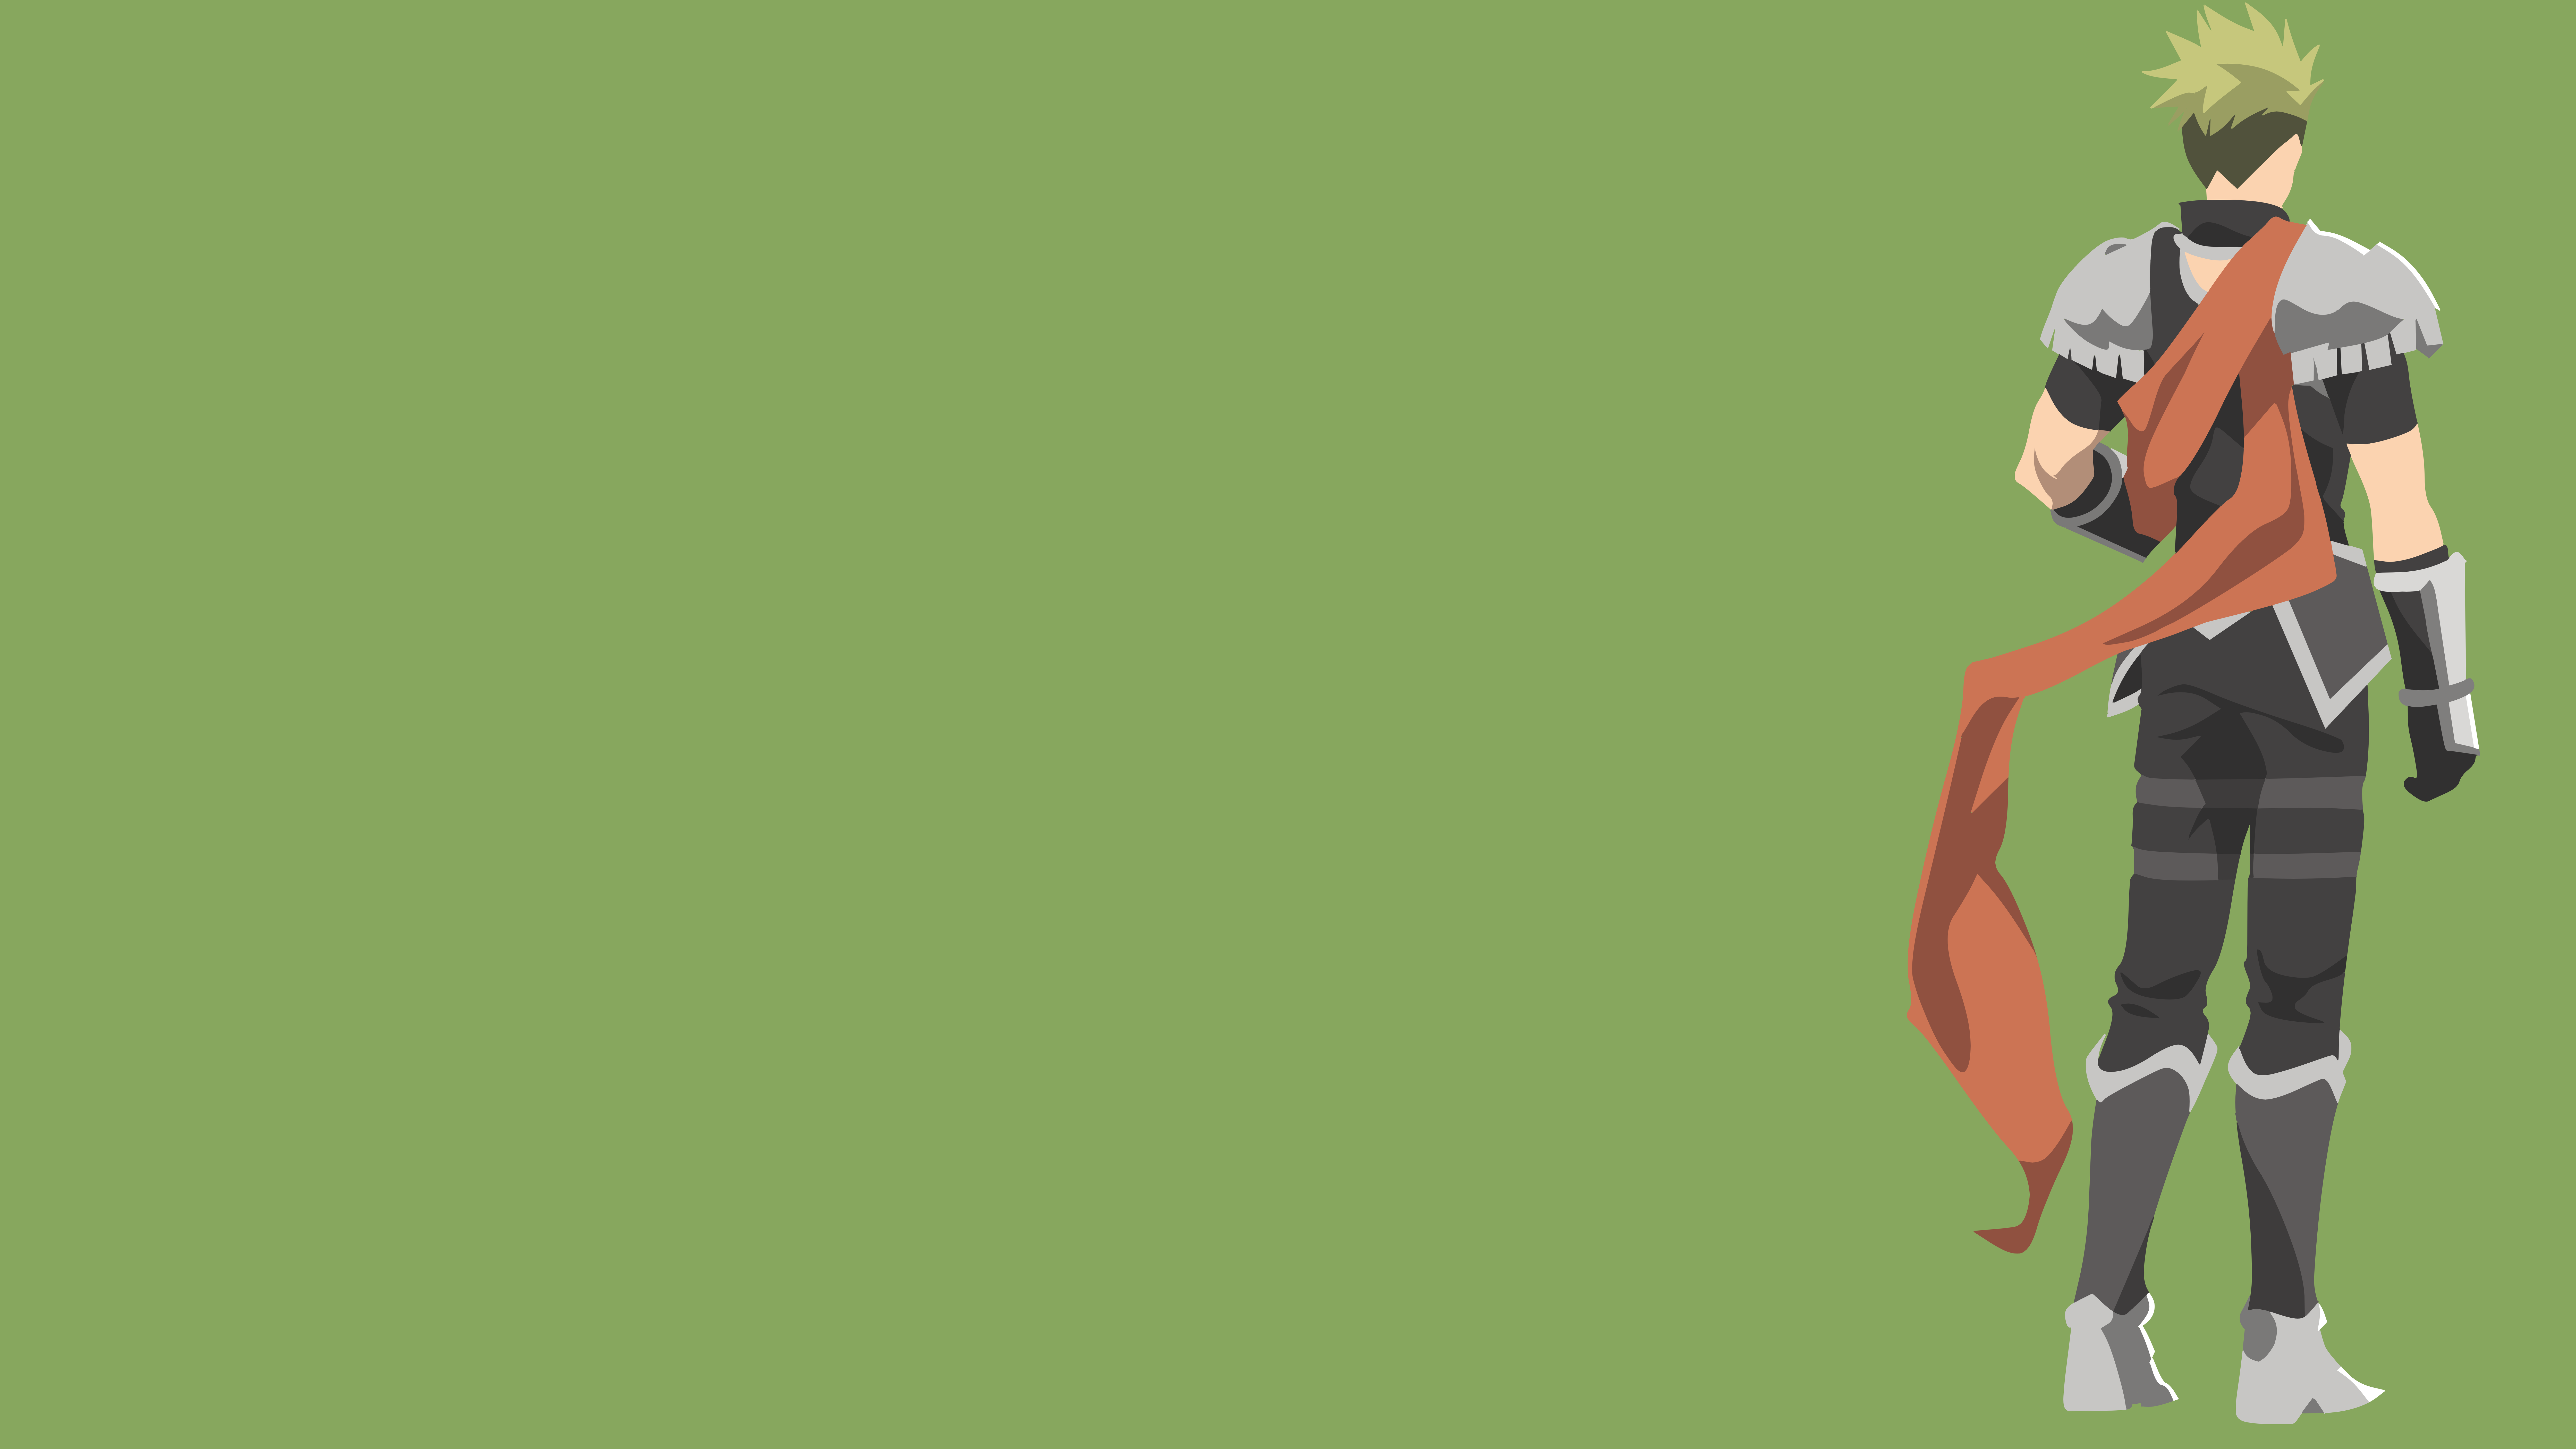 Achilles Fate Apocrypha Minimalist Rider Of Red Fate Apocrypha 16000x9000